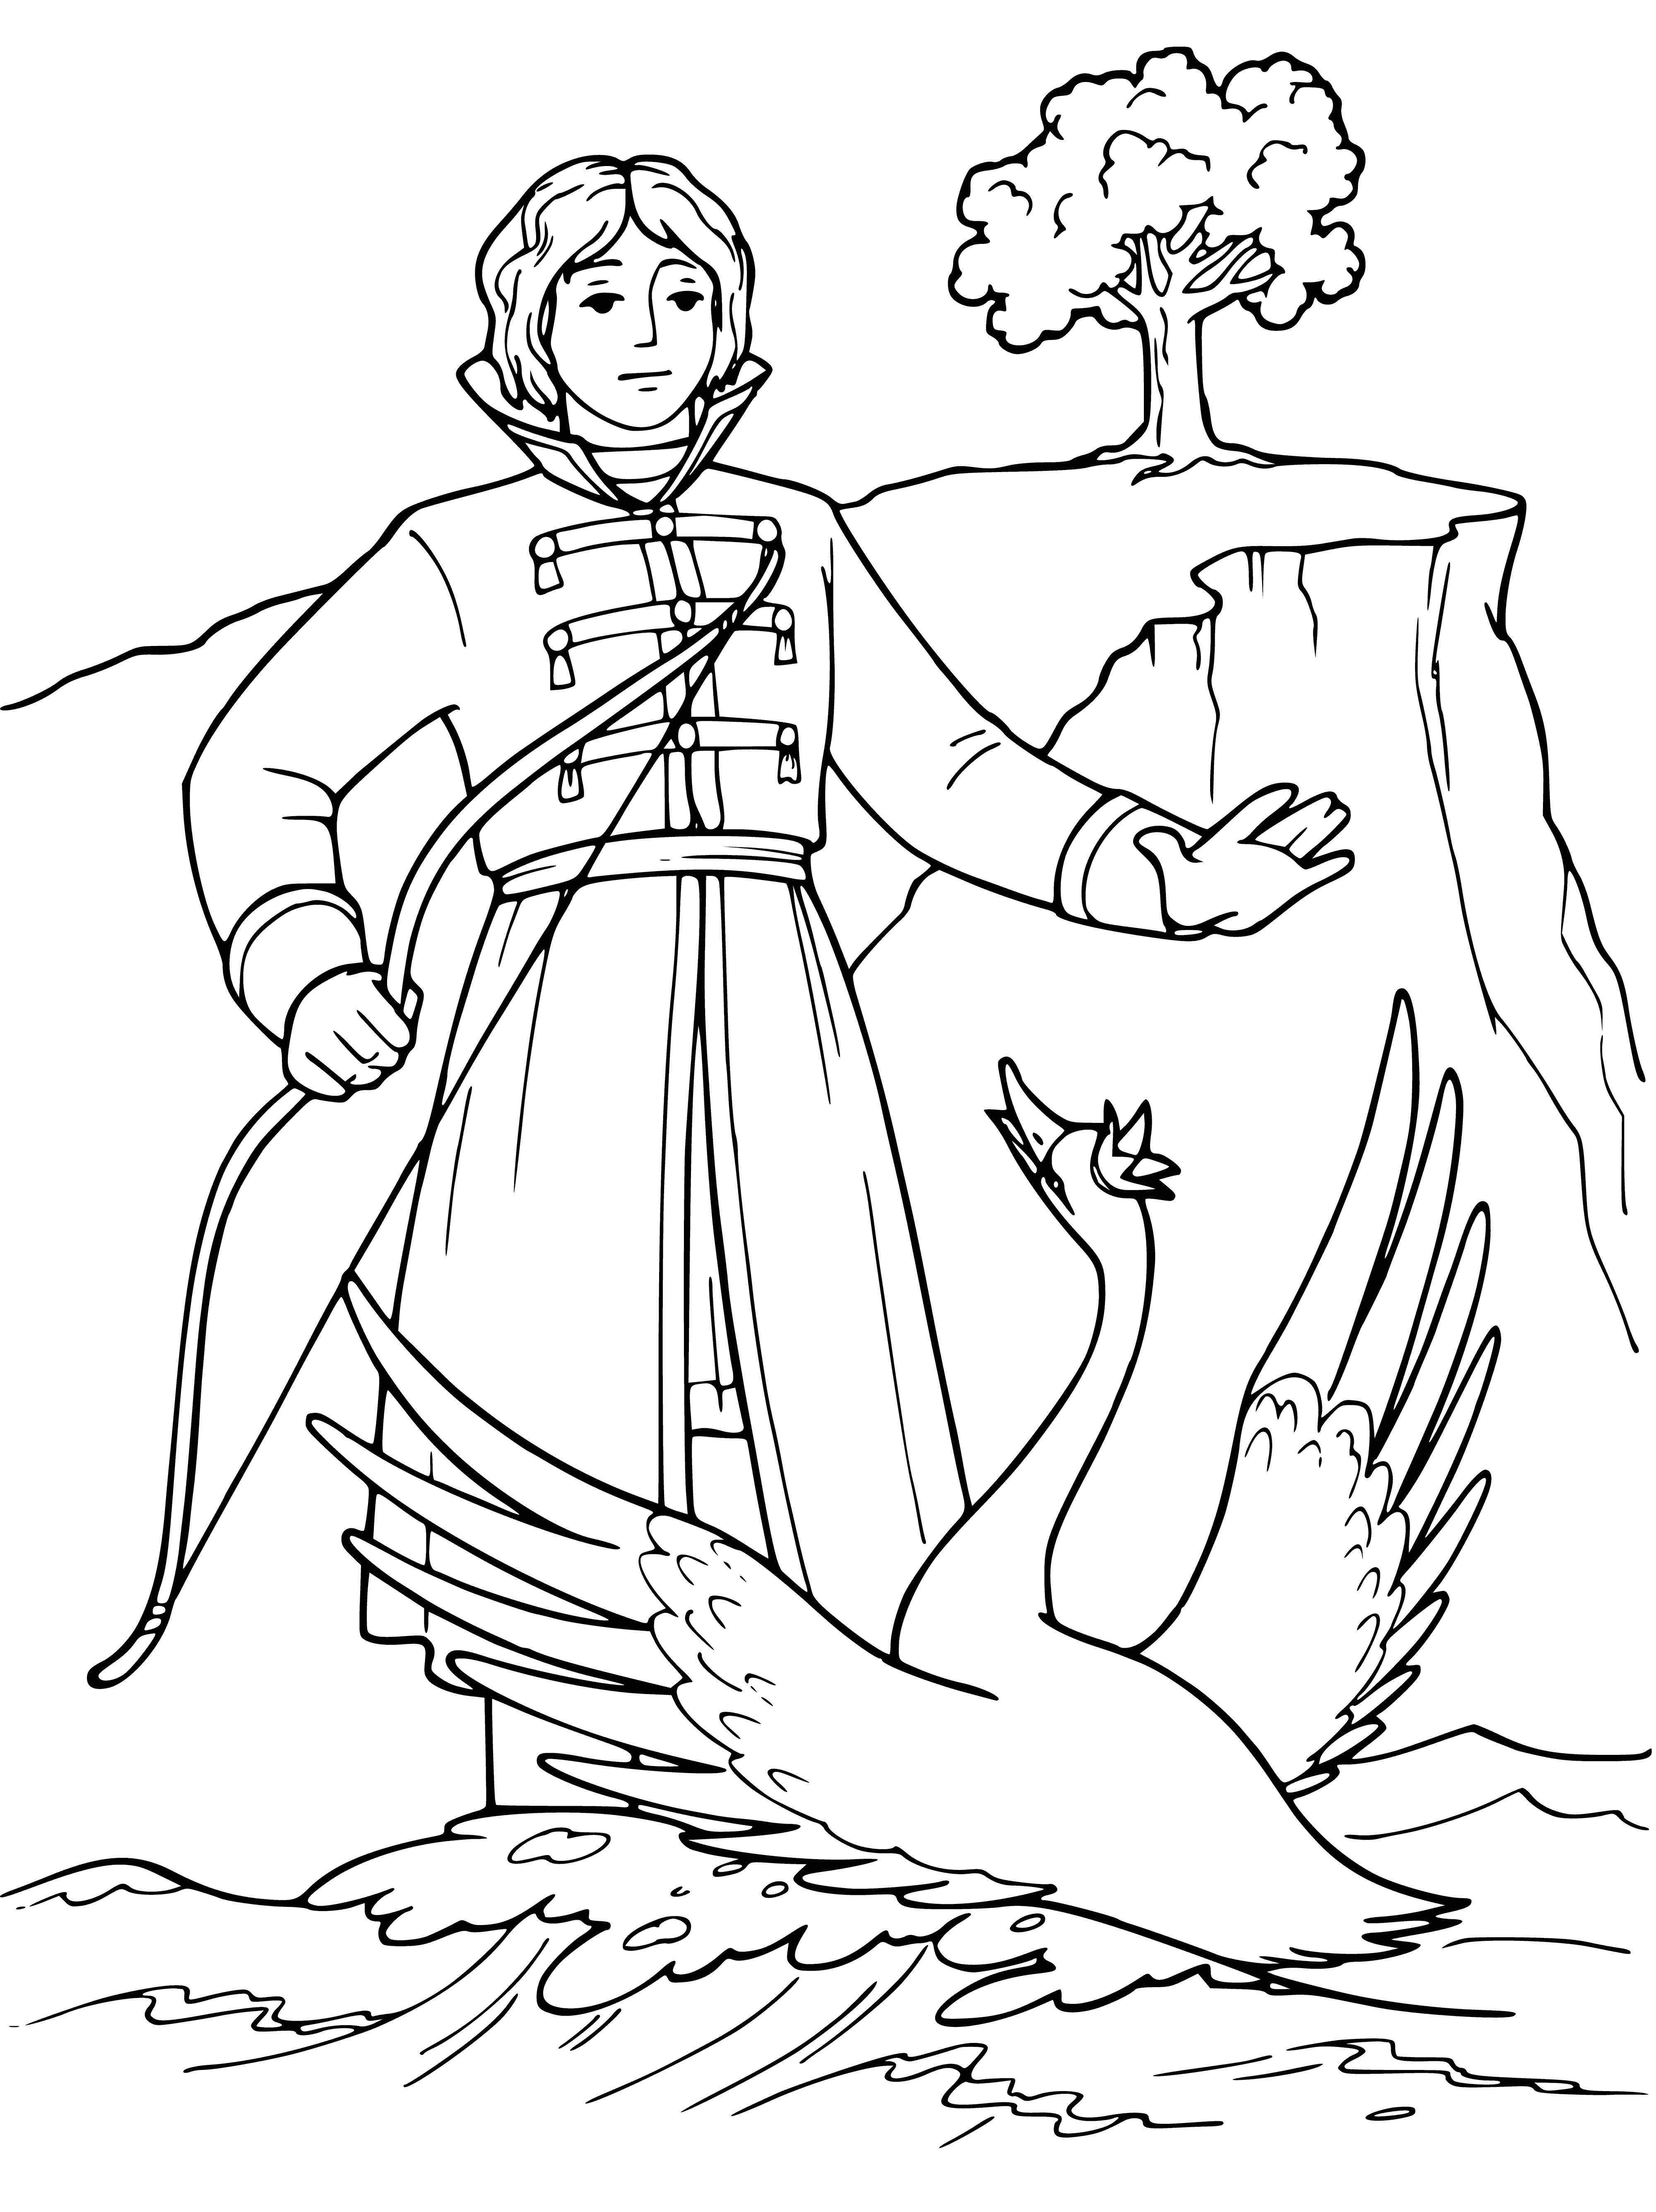 coloring page: Man on horseback rides into water to save struggling swan, surrounded by soldiers and watched by group of people on shore.